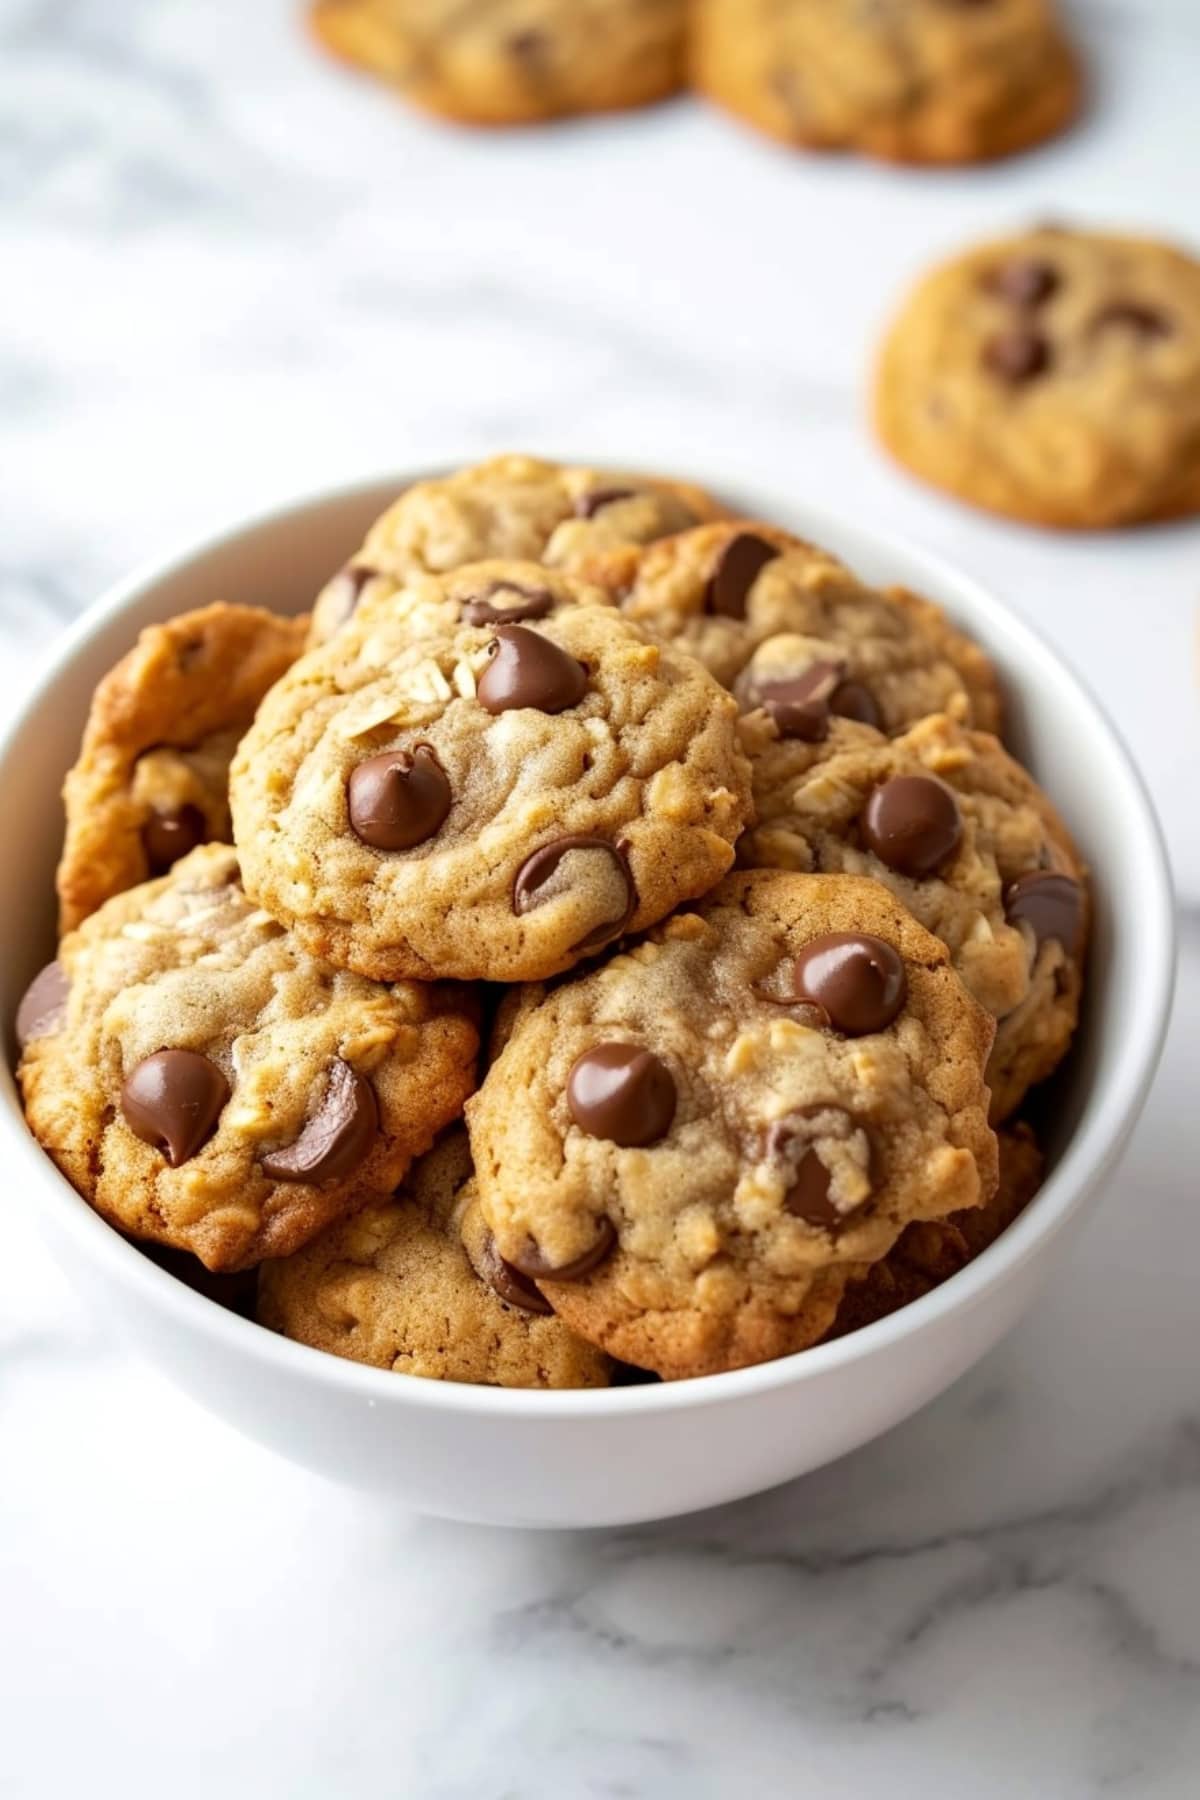 Sweet and chewy oatmeal chocolate chip cookies in a white bowl on a marble table